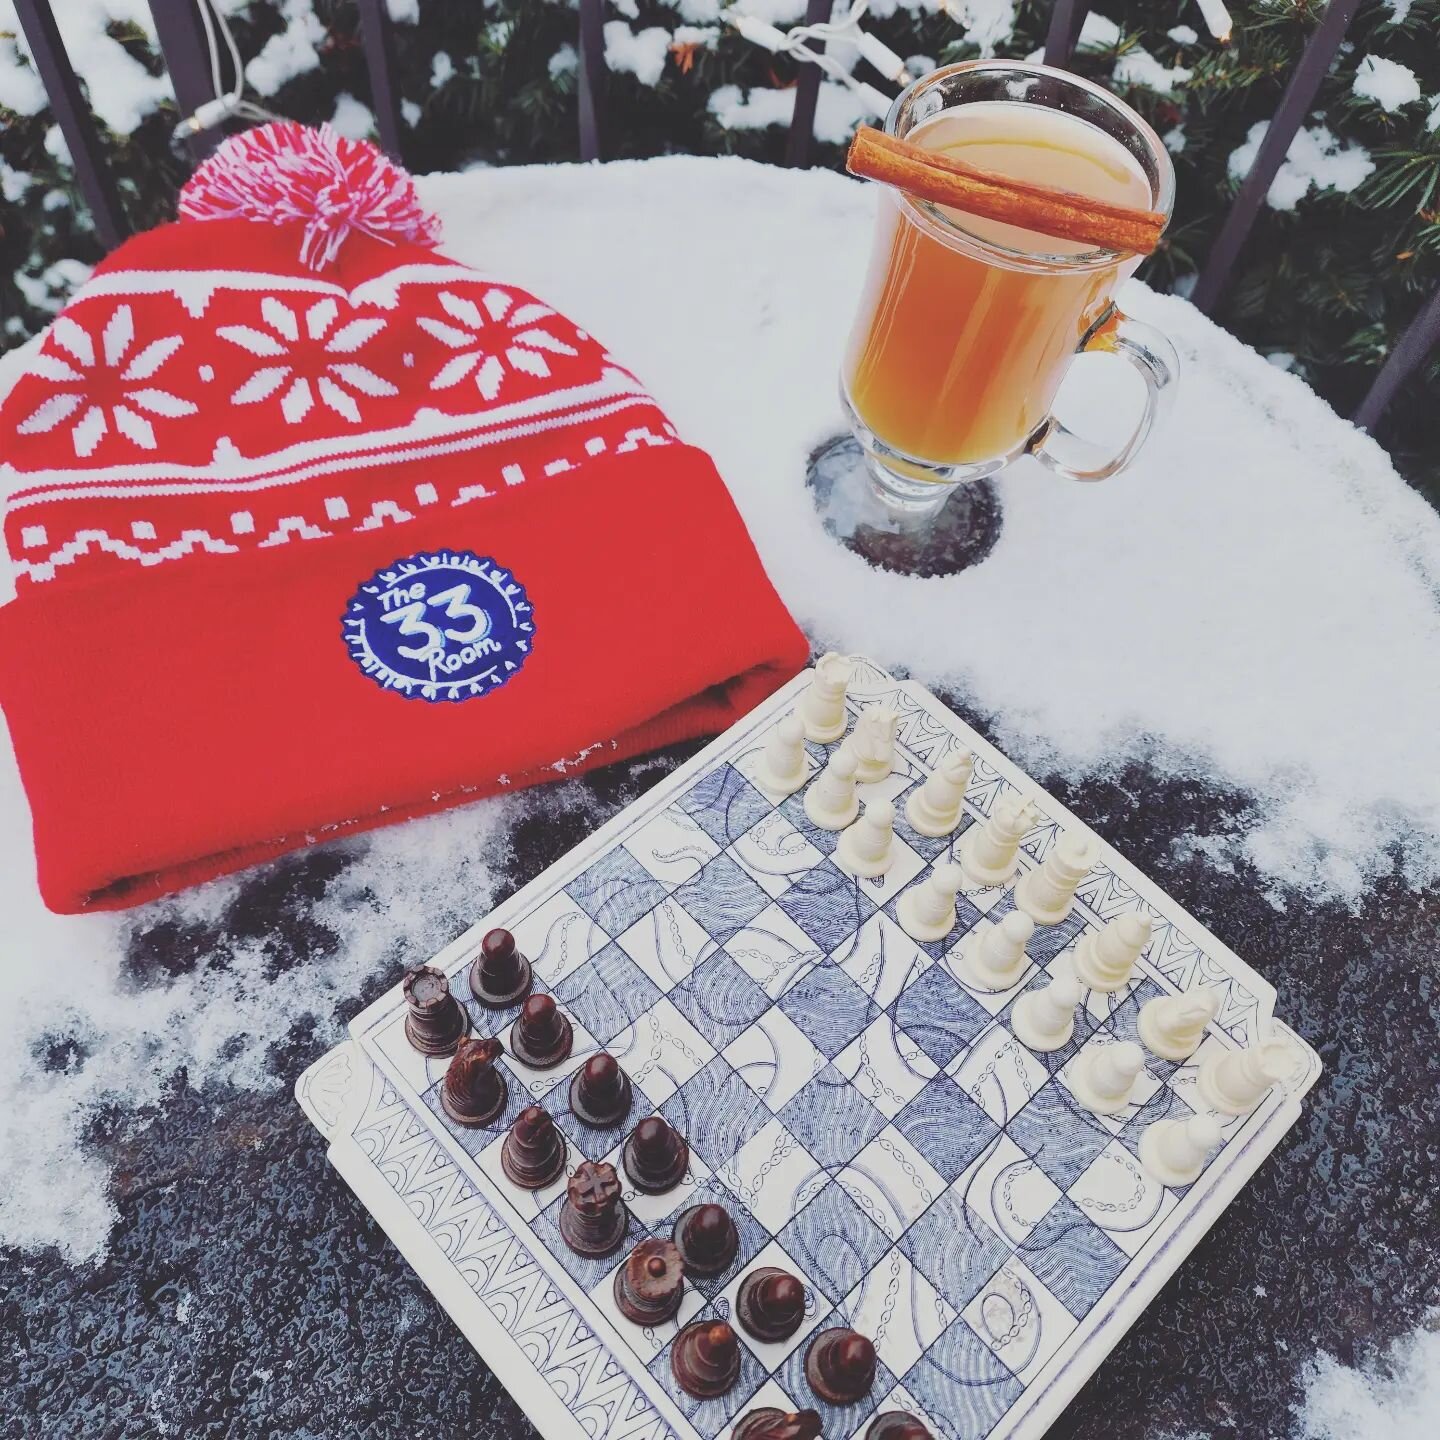 It may not be game night tonight (Jan 12th and 26th are though) but our collection of games is always available. Come escape the cold for a hot toddy, get cozy with a beanie and a game as the wind whips outside. Cheers!
.
.
.
.
.
.
.
Thanks to @cabba